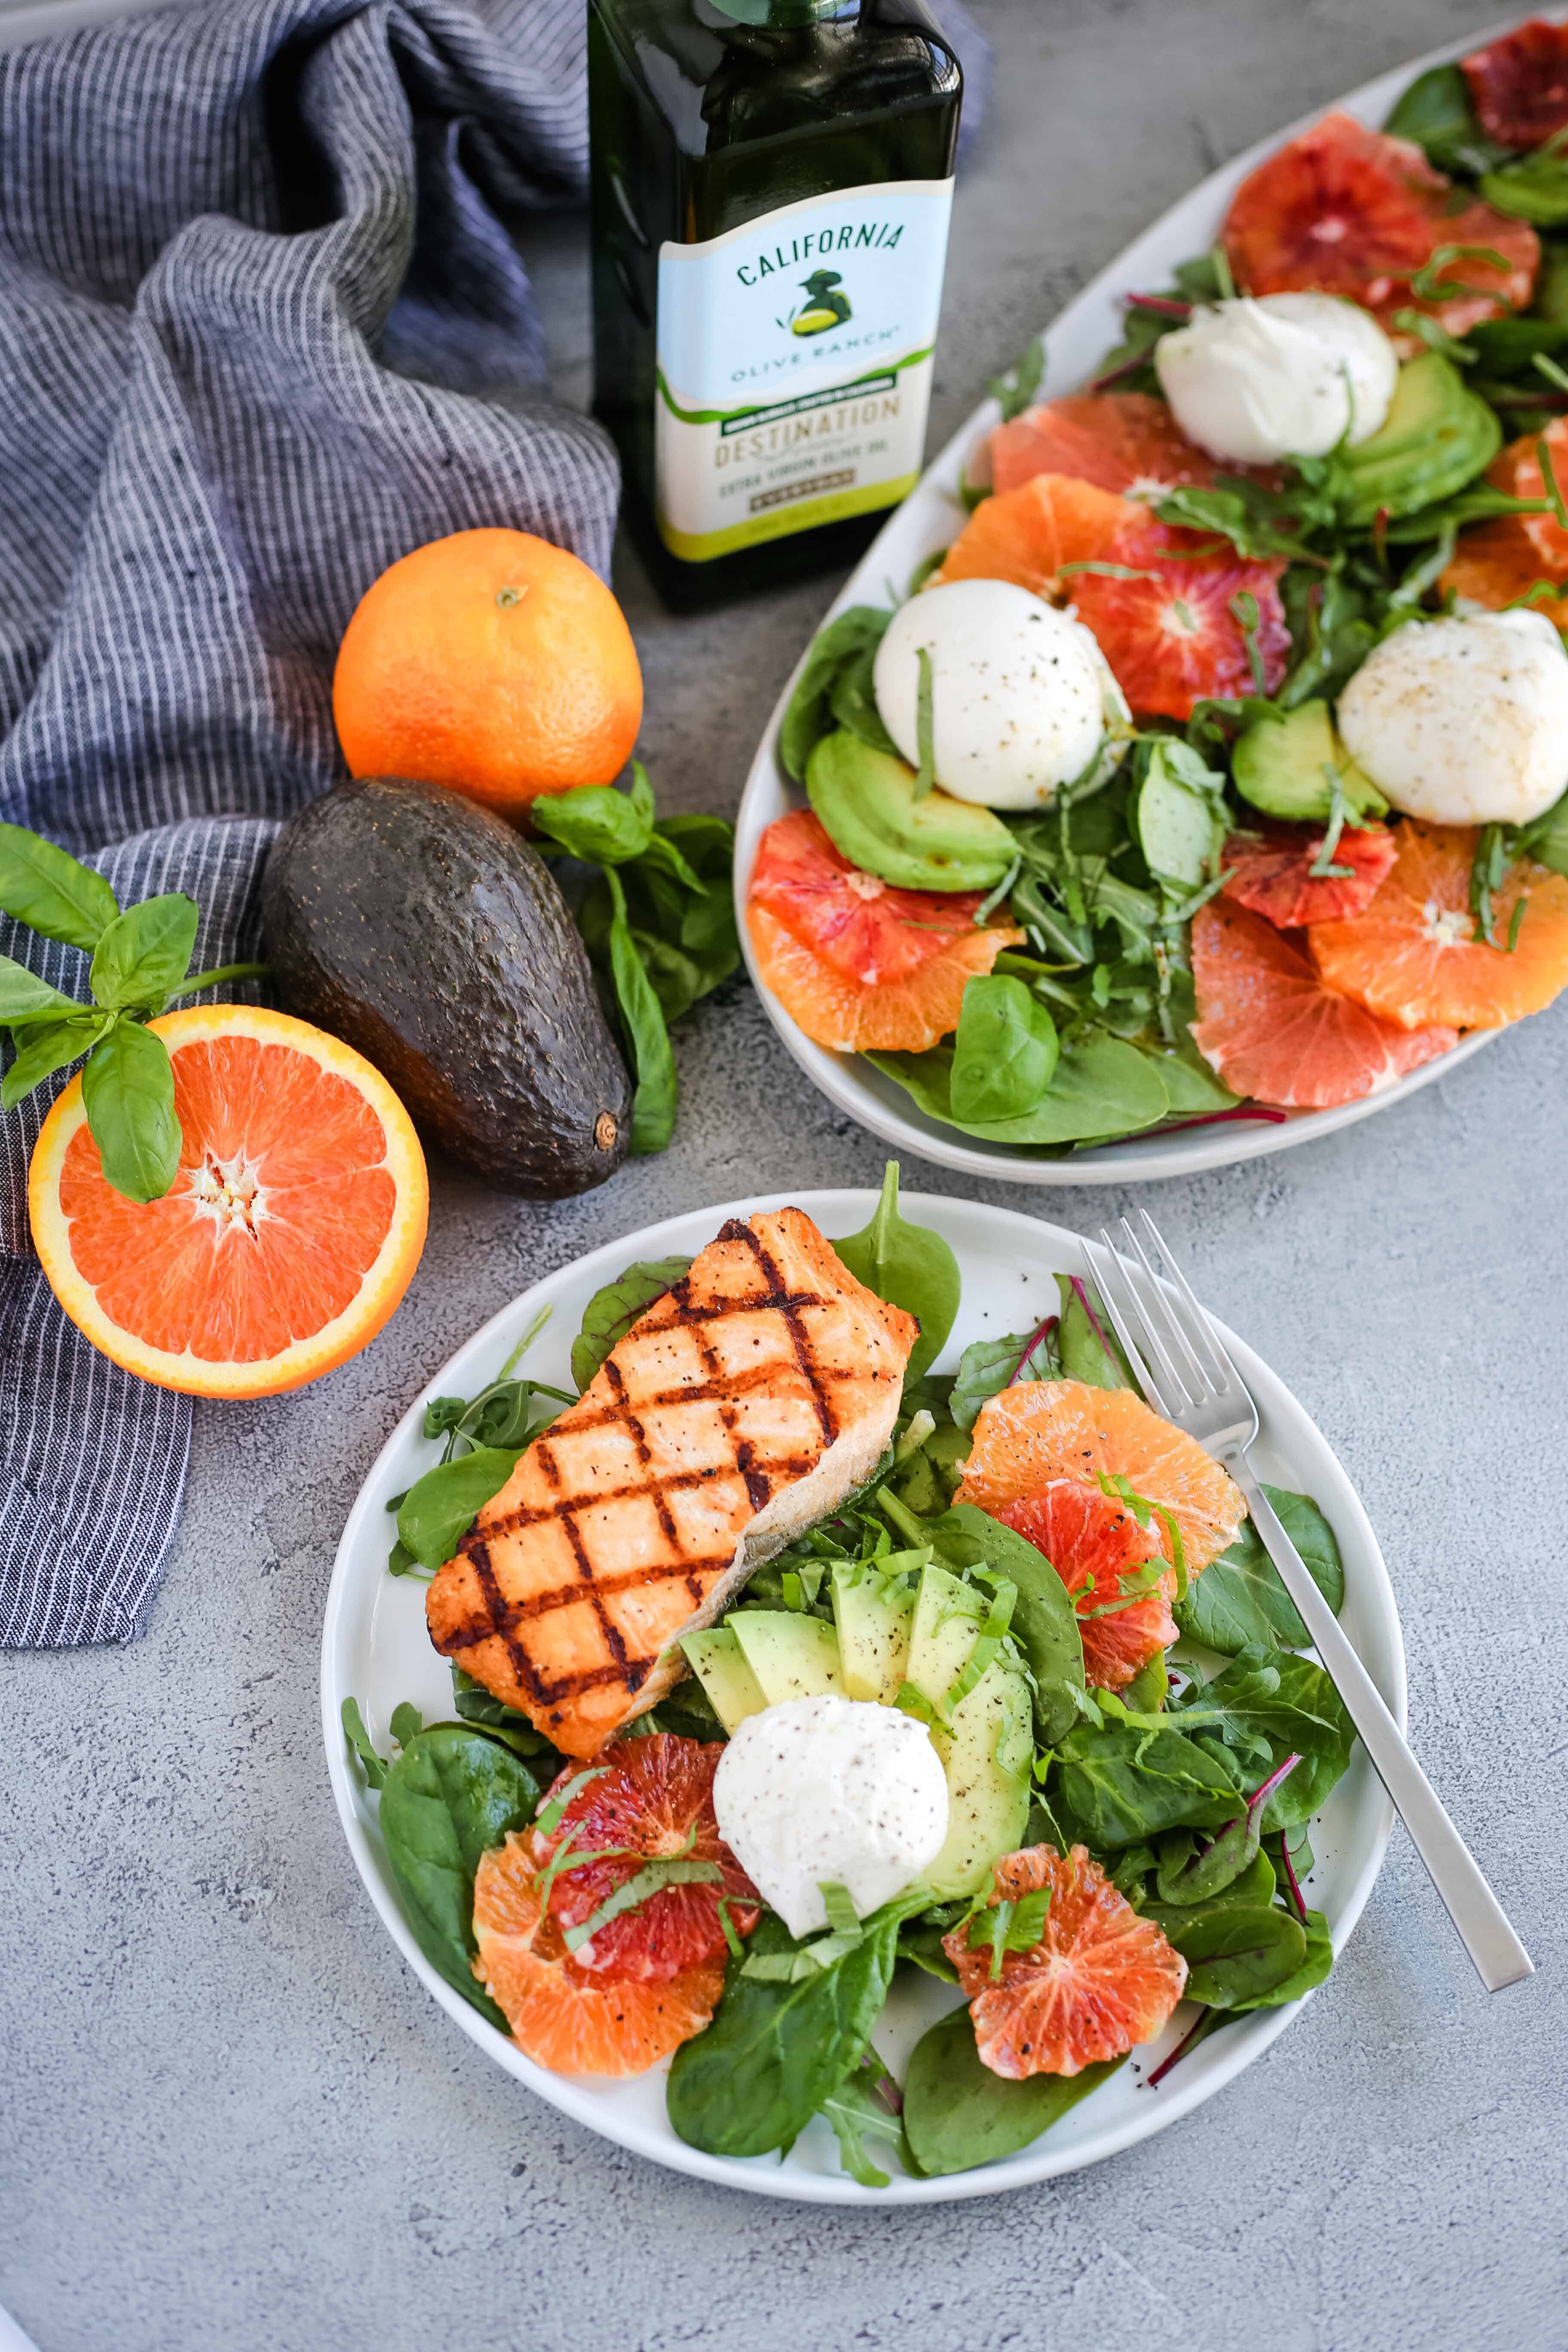 What should you make with winter citrus fruit? Let your fresh ingredients shine in this Winter Citrus Caprese Salad, featuring California Olive Ranch Olive Oil